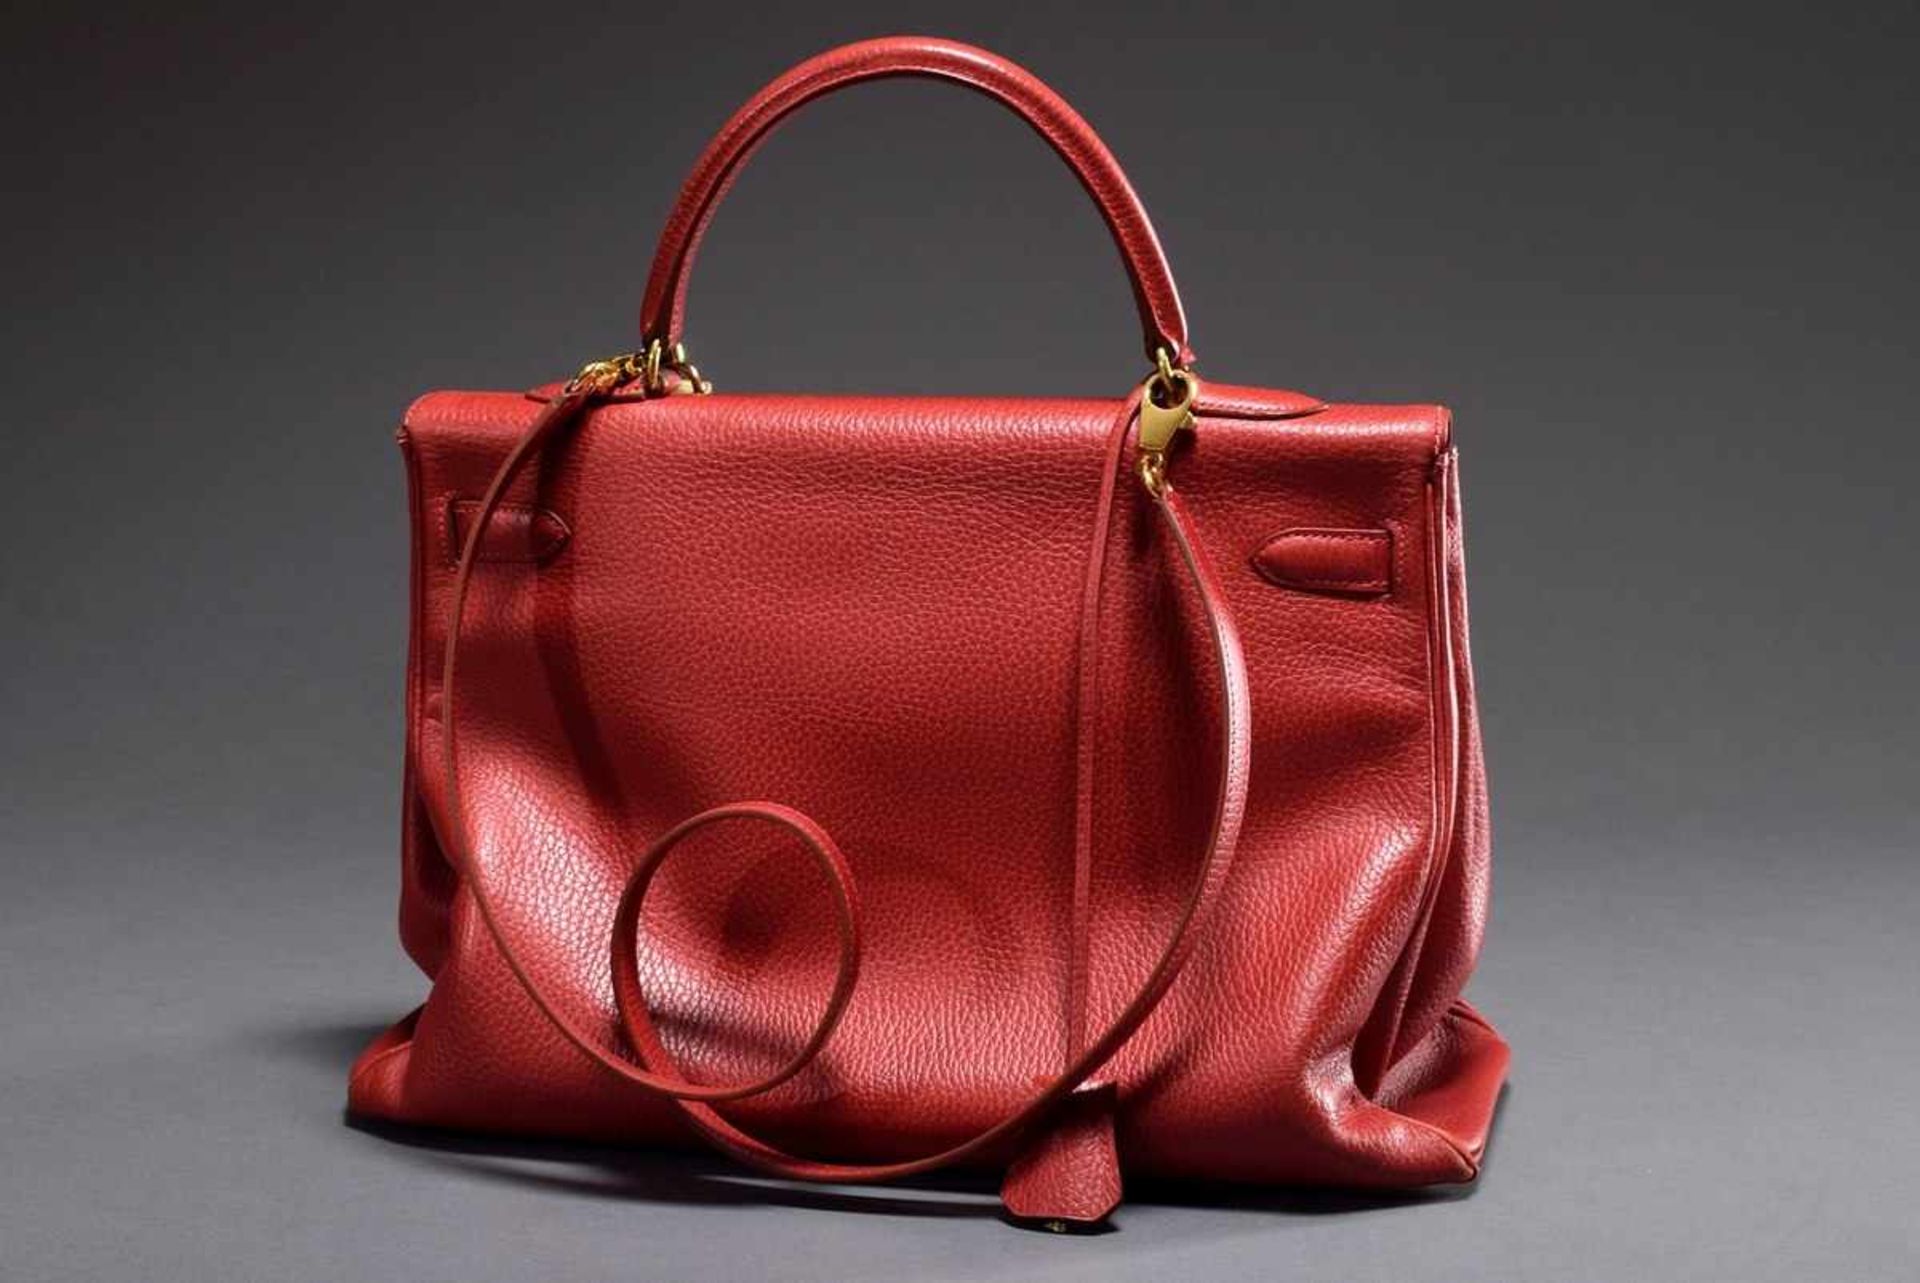 Hermès "Kelly Bag Souple 35", 1998, red calfskin, trapezoid body with arched handle, flap with - Bild 3 aus 8